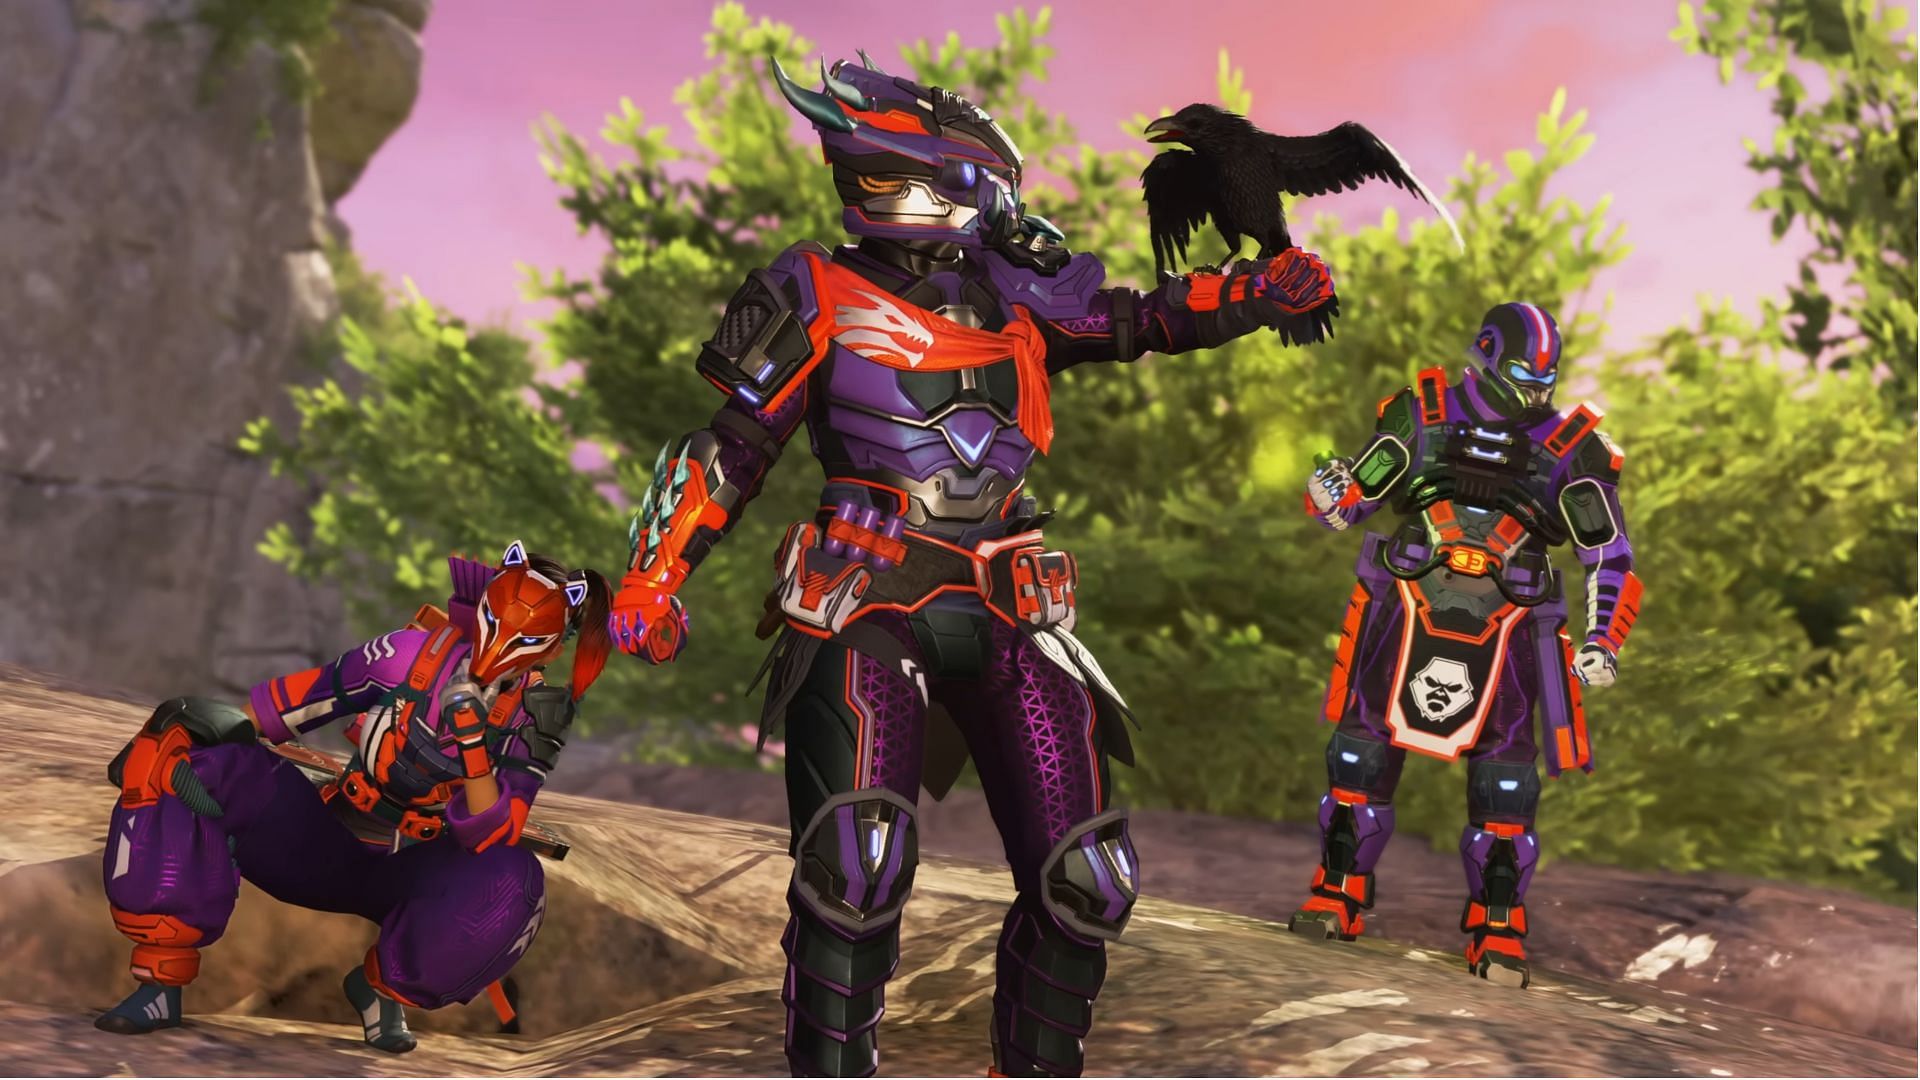 All skins and cosmetics in Inner Beast Legends event in Apex Legends (Image via Respawn Entertainment)